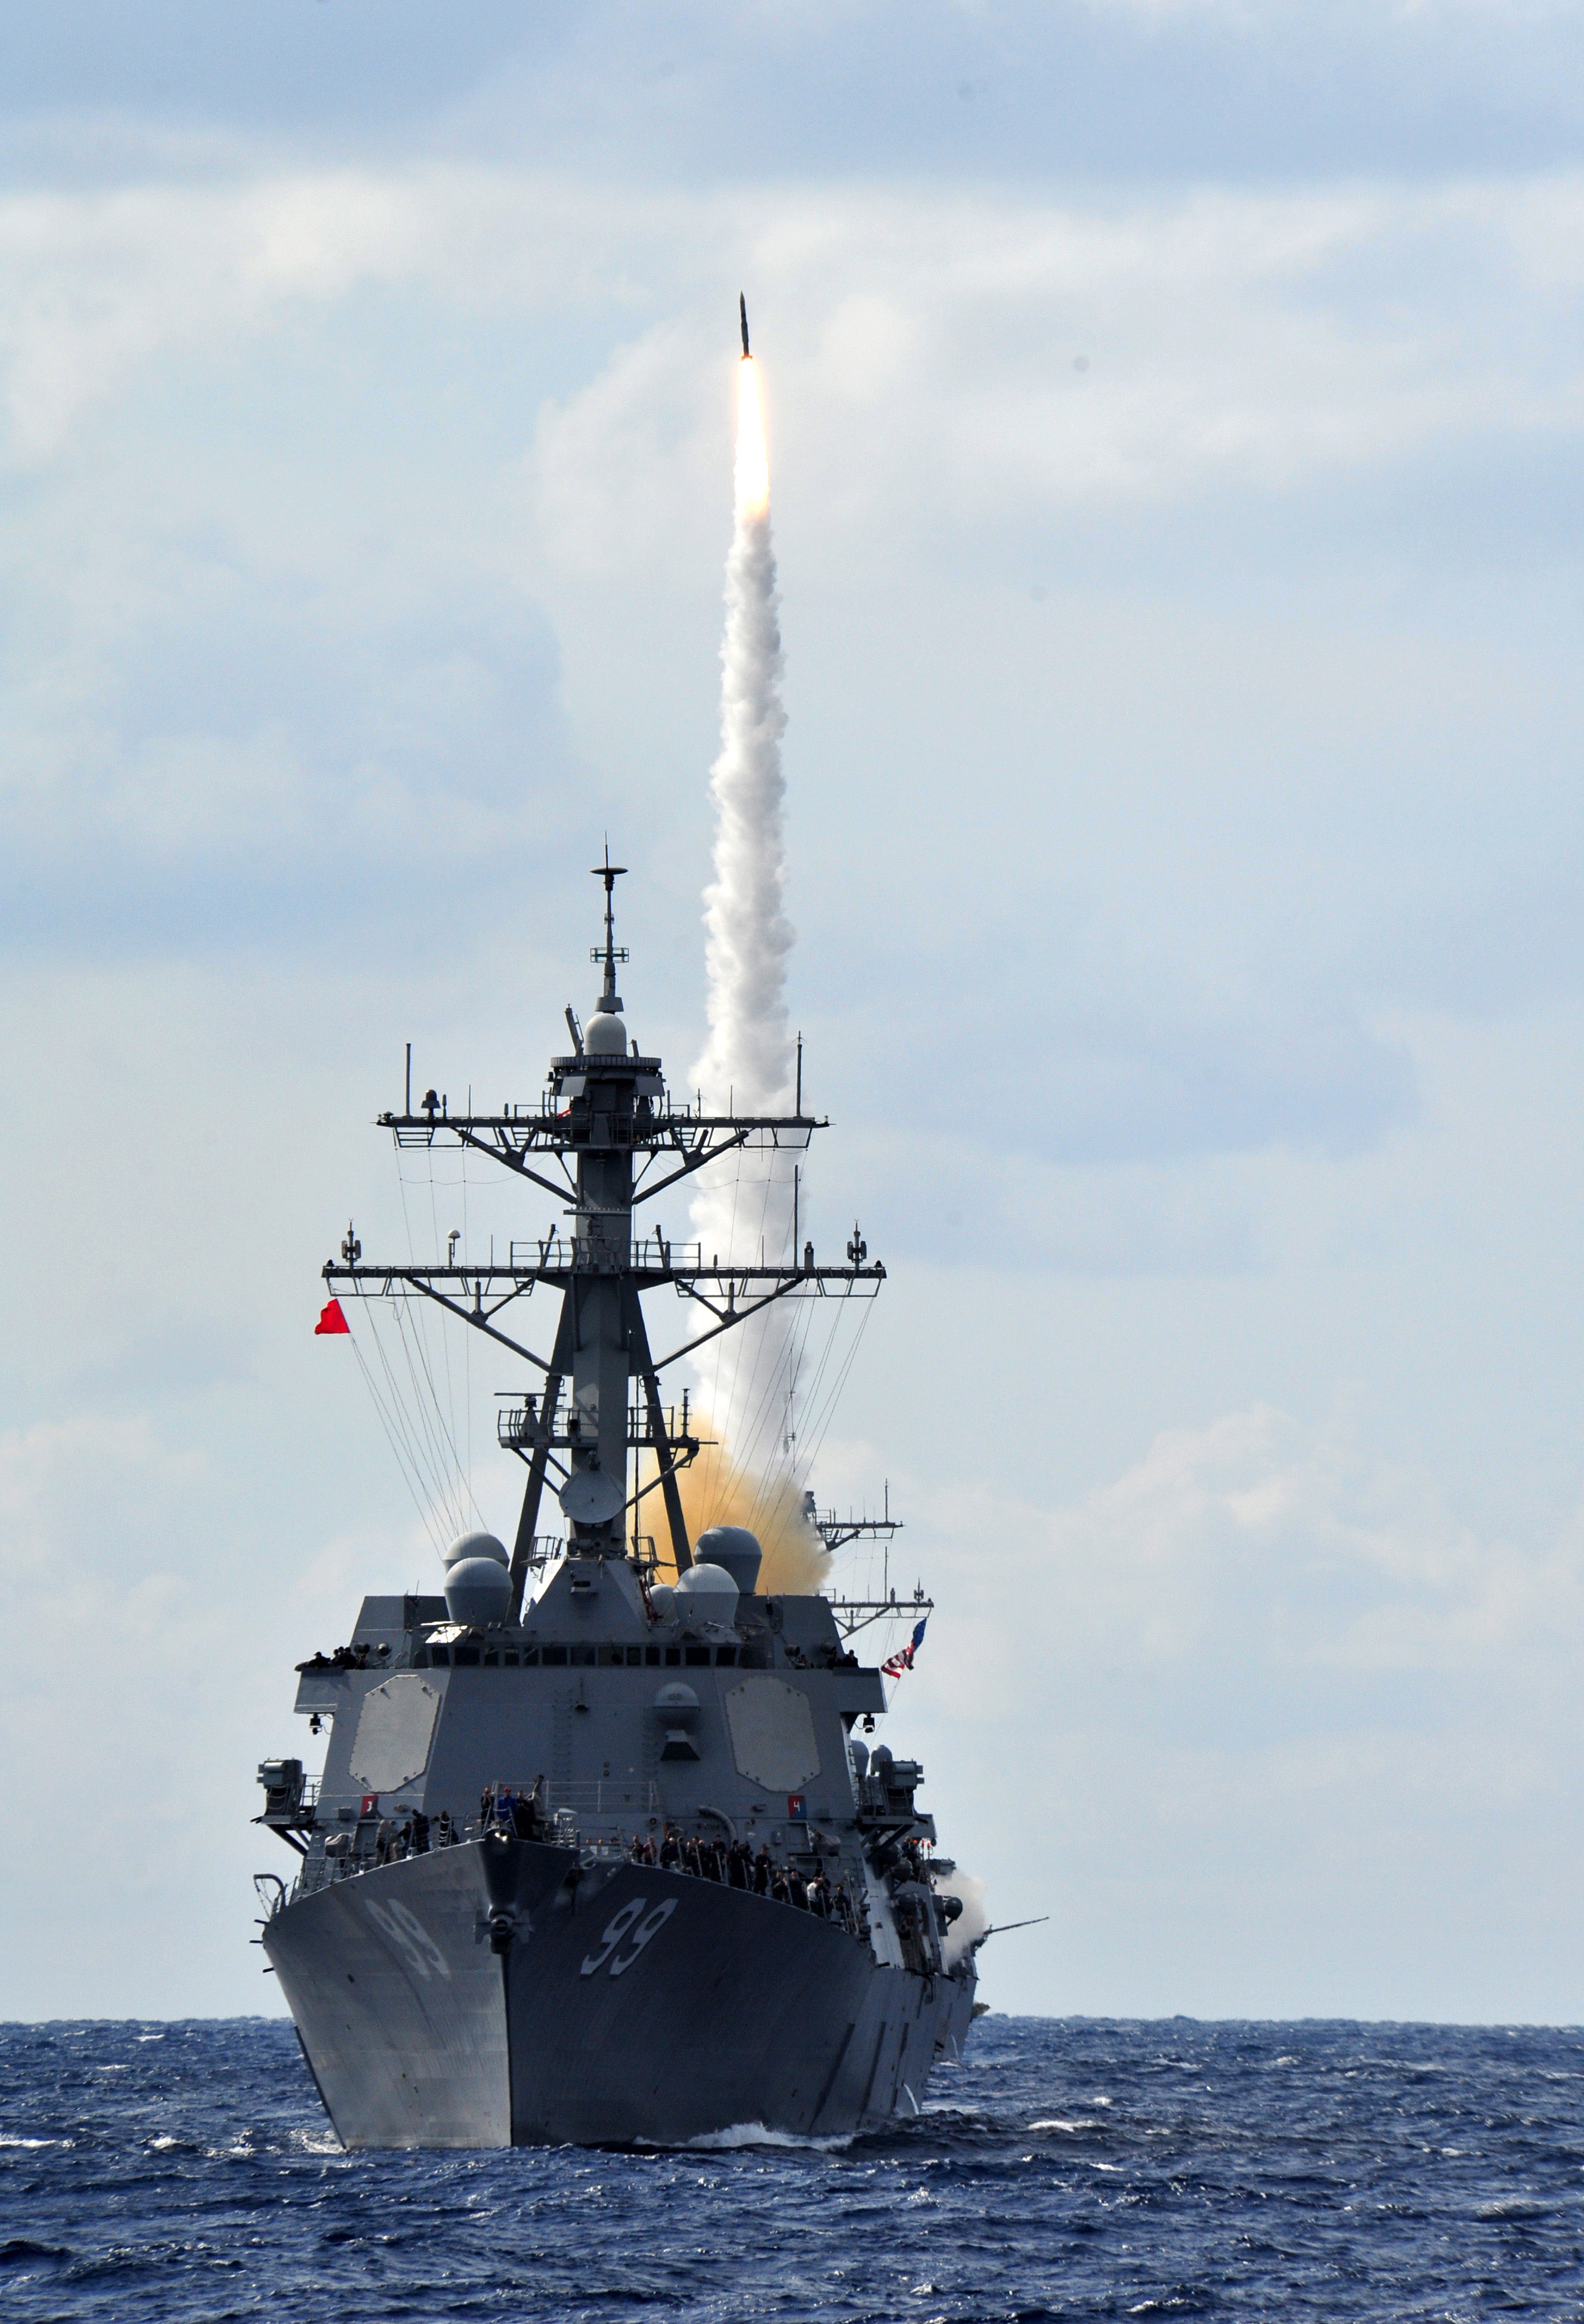 Defense.gov_News_Photo_120321-N-QL471-059_-_A_Standard_Missile_SM_2_is_fired_from_a_launcher_during_a_live-fire_exercise_aboard_the_guided-missile_destroyer_USS_Farragut_DDG_99_in_the.jpg